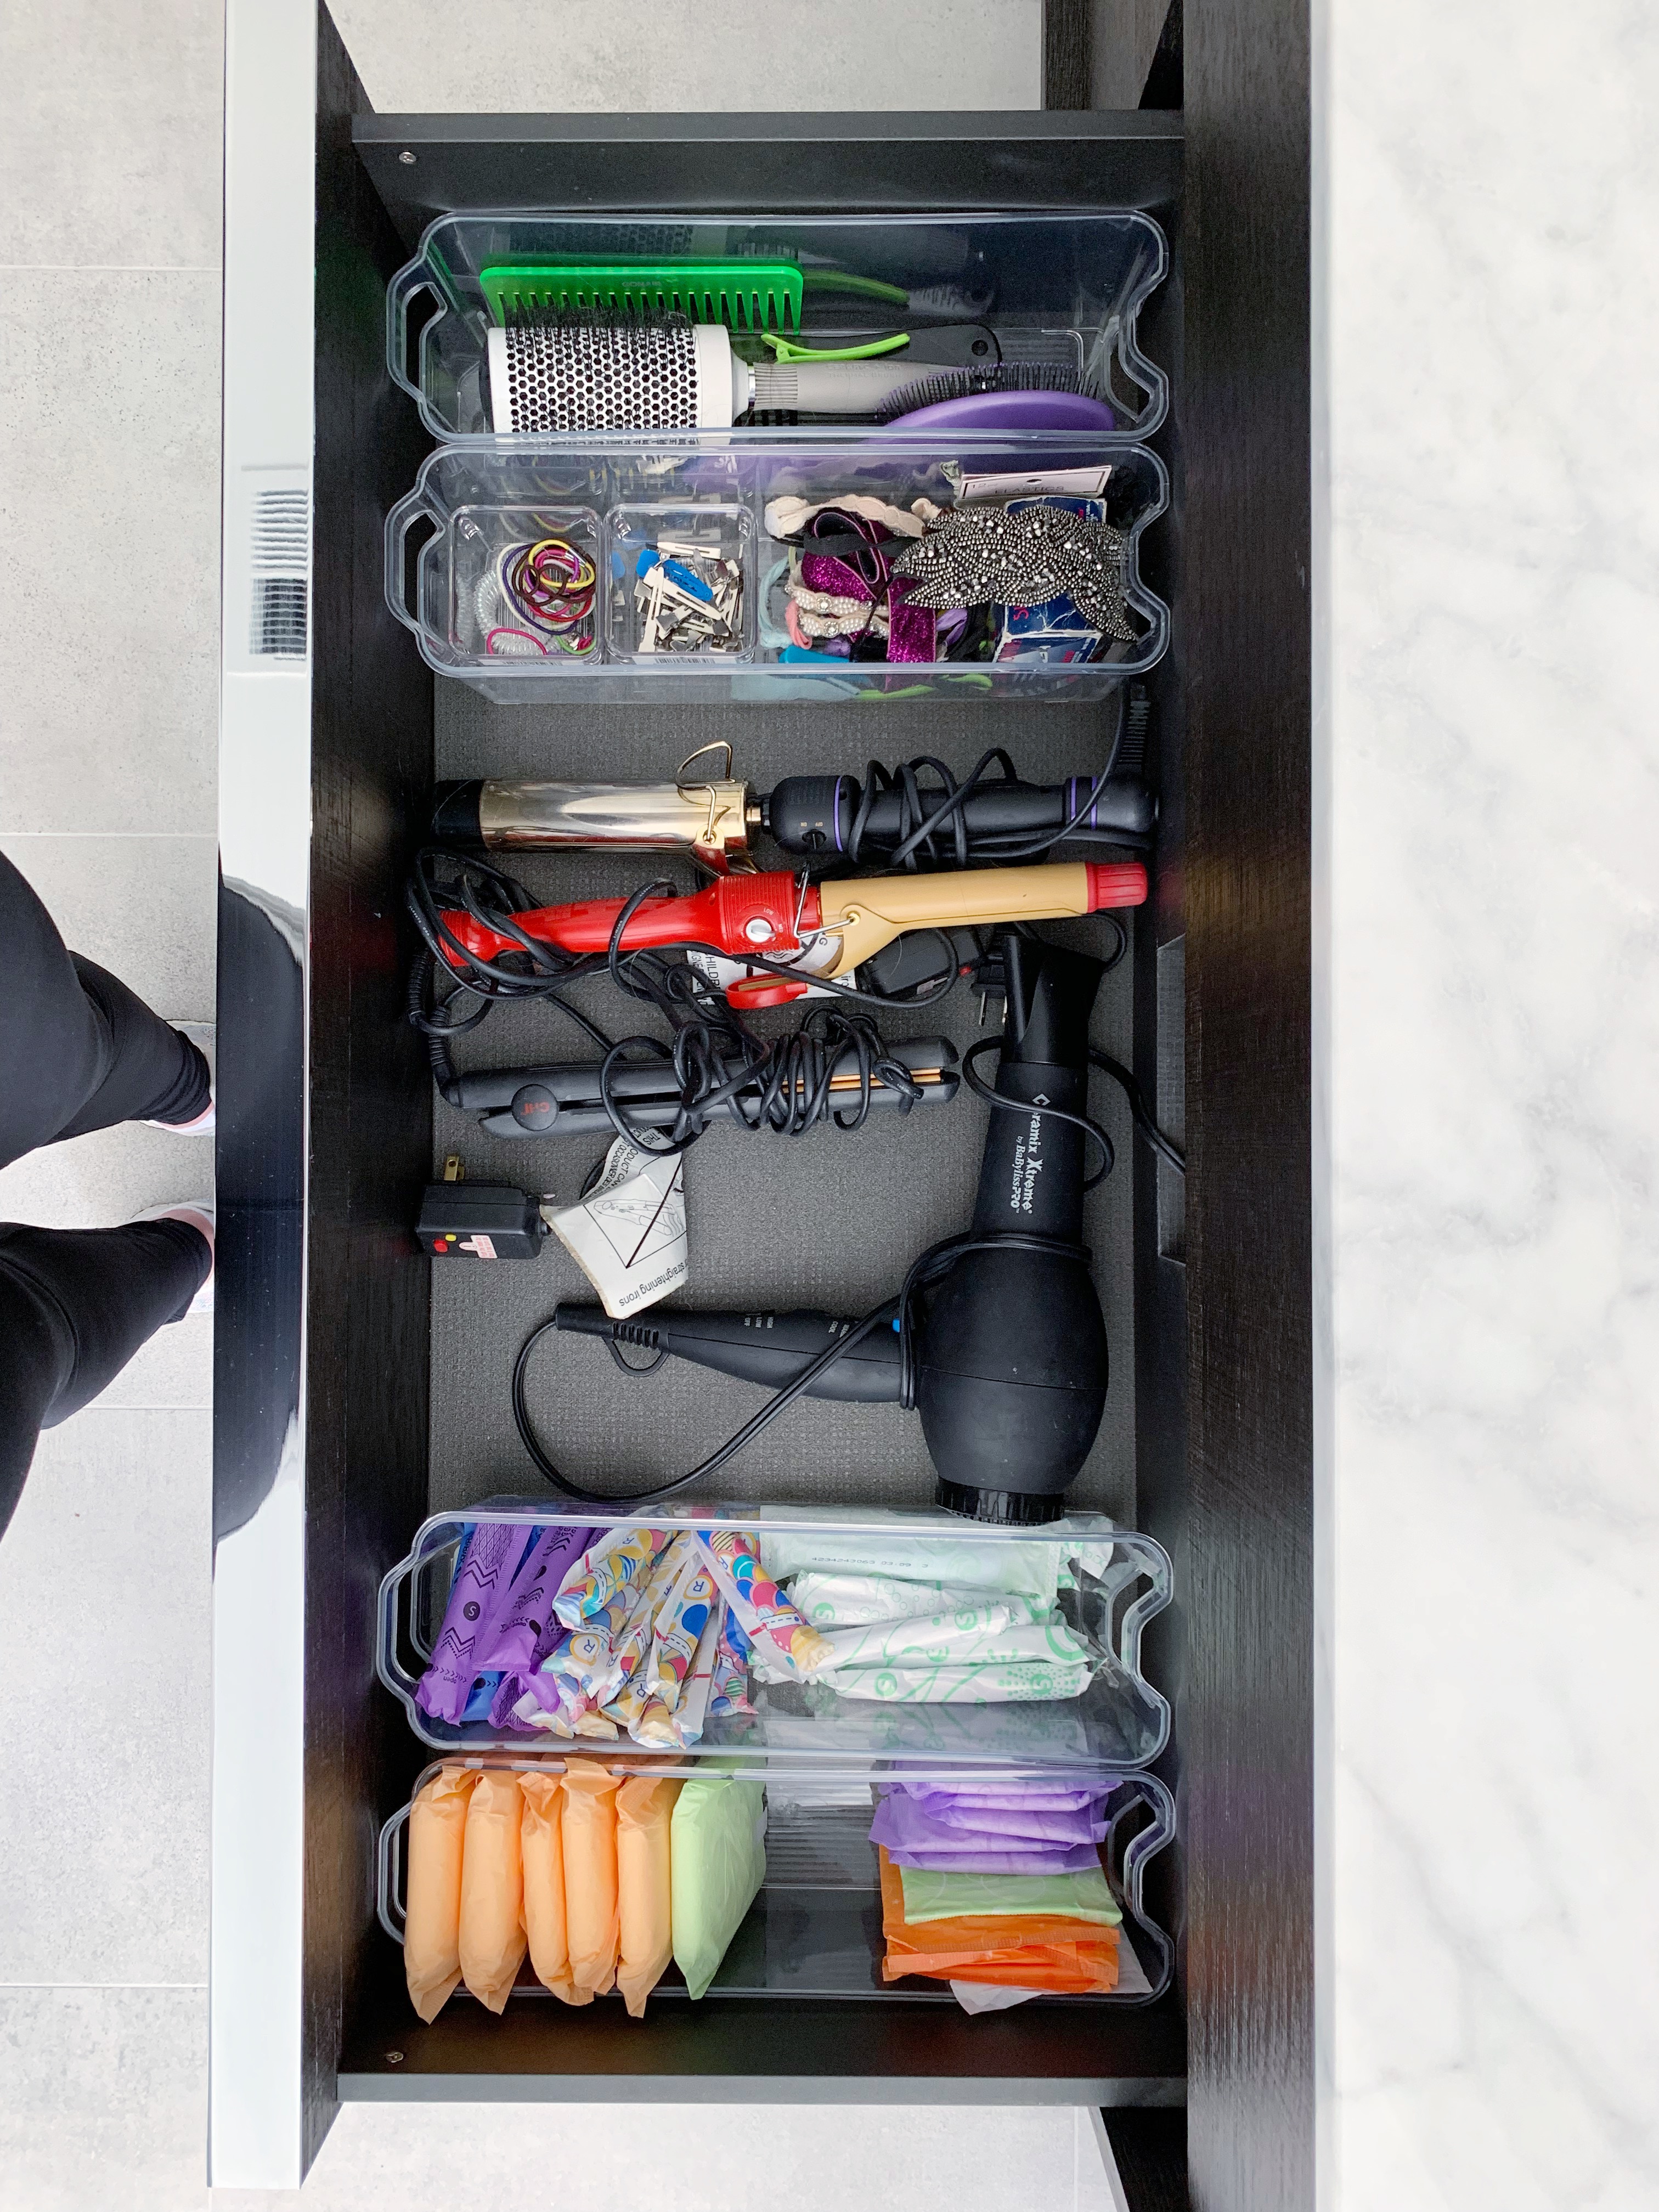 https://simplyorganized.me/wp-content/uploads/2019/03/how-to-organize-a-hair-styling-drawer.jpg